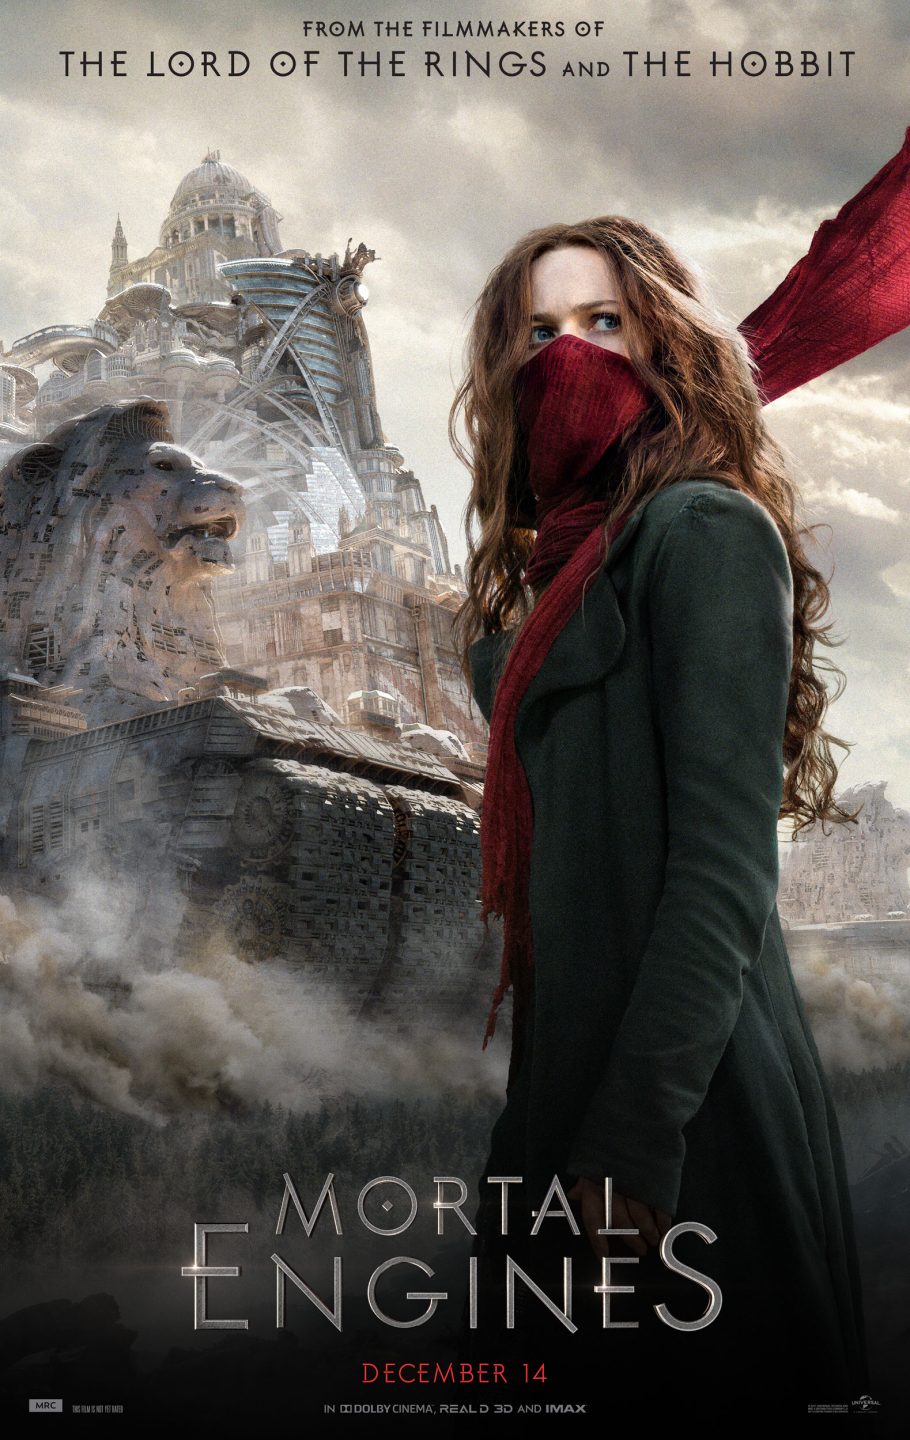 Mortal Engines poster (Universal Pictures)